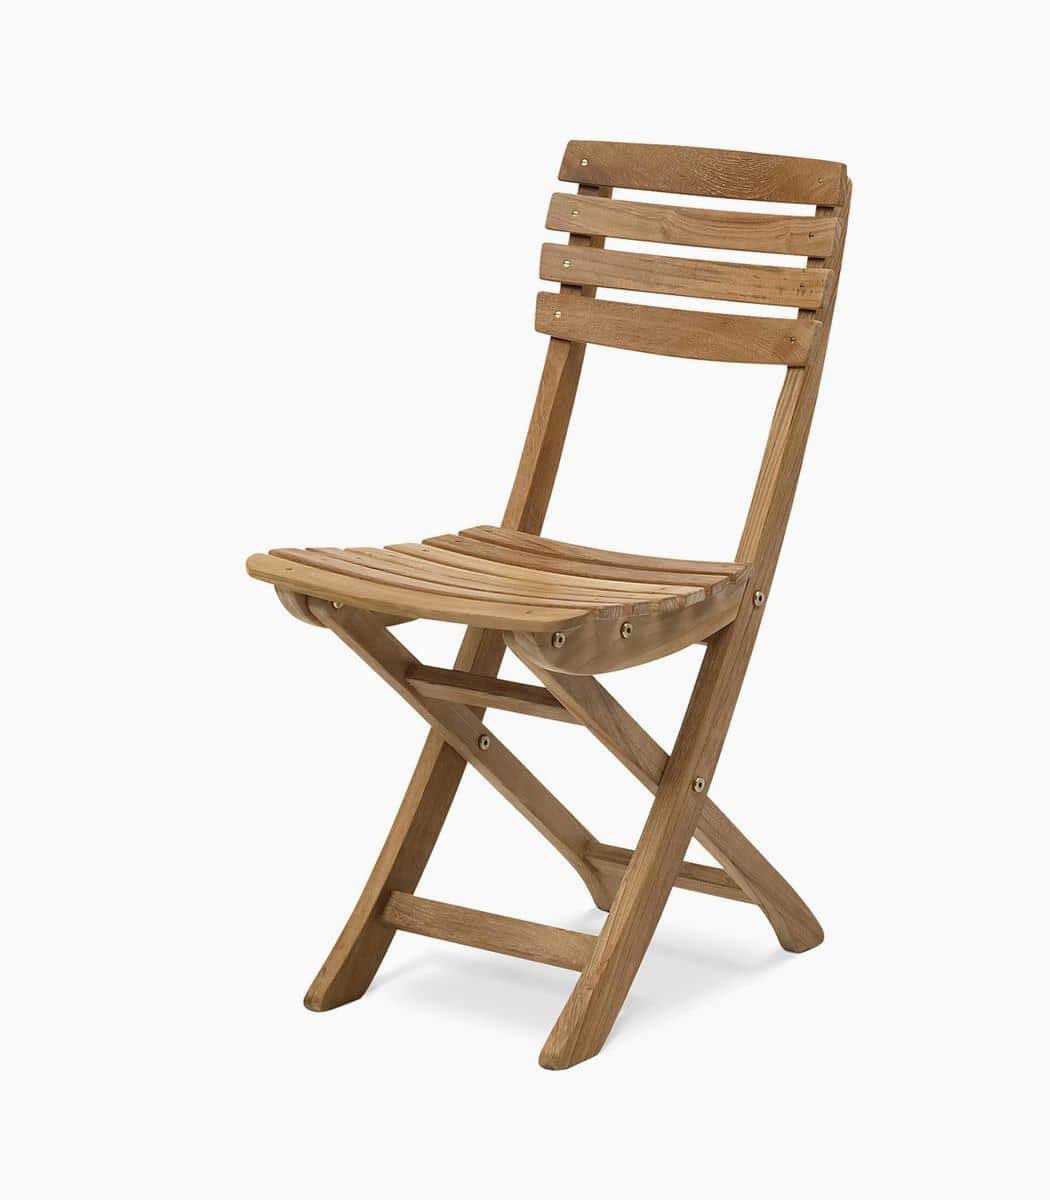 classic wooden chair 1 NỘI THẤT GKCONCEPT